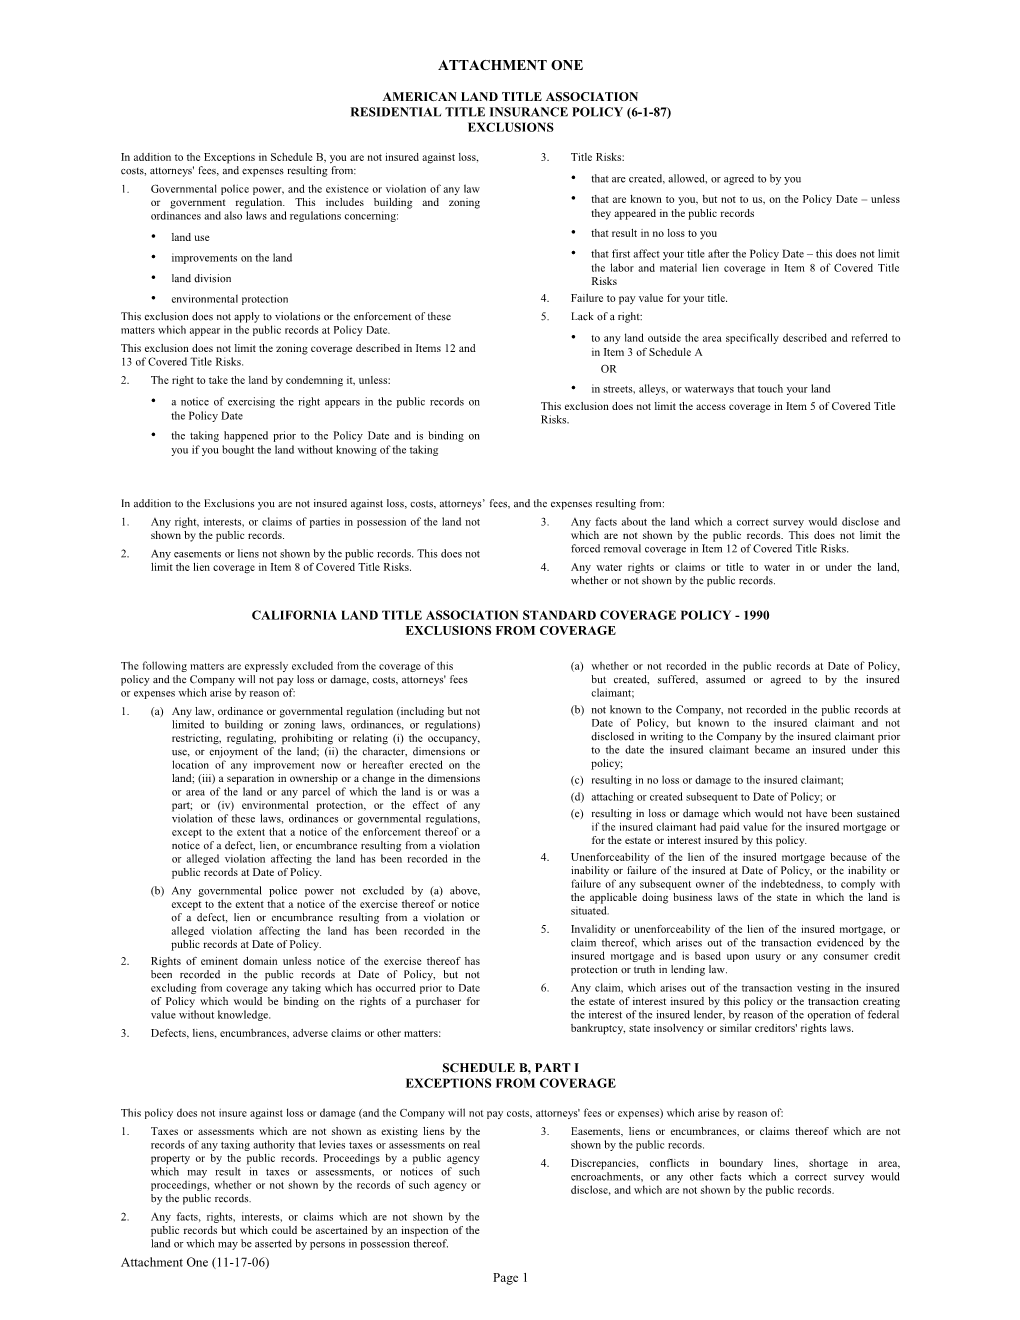 Residential Title Insurance Policy (6-1-87)